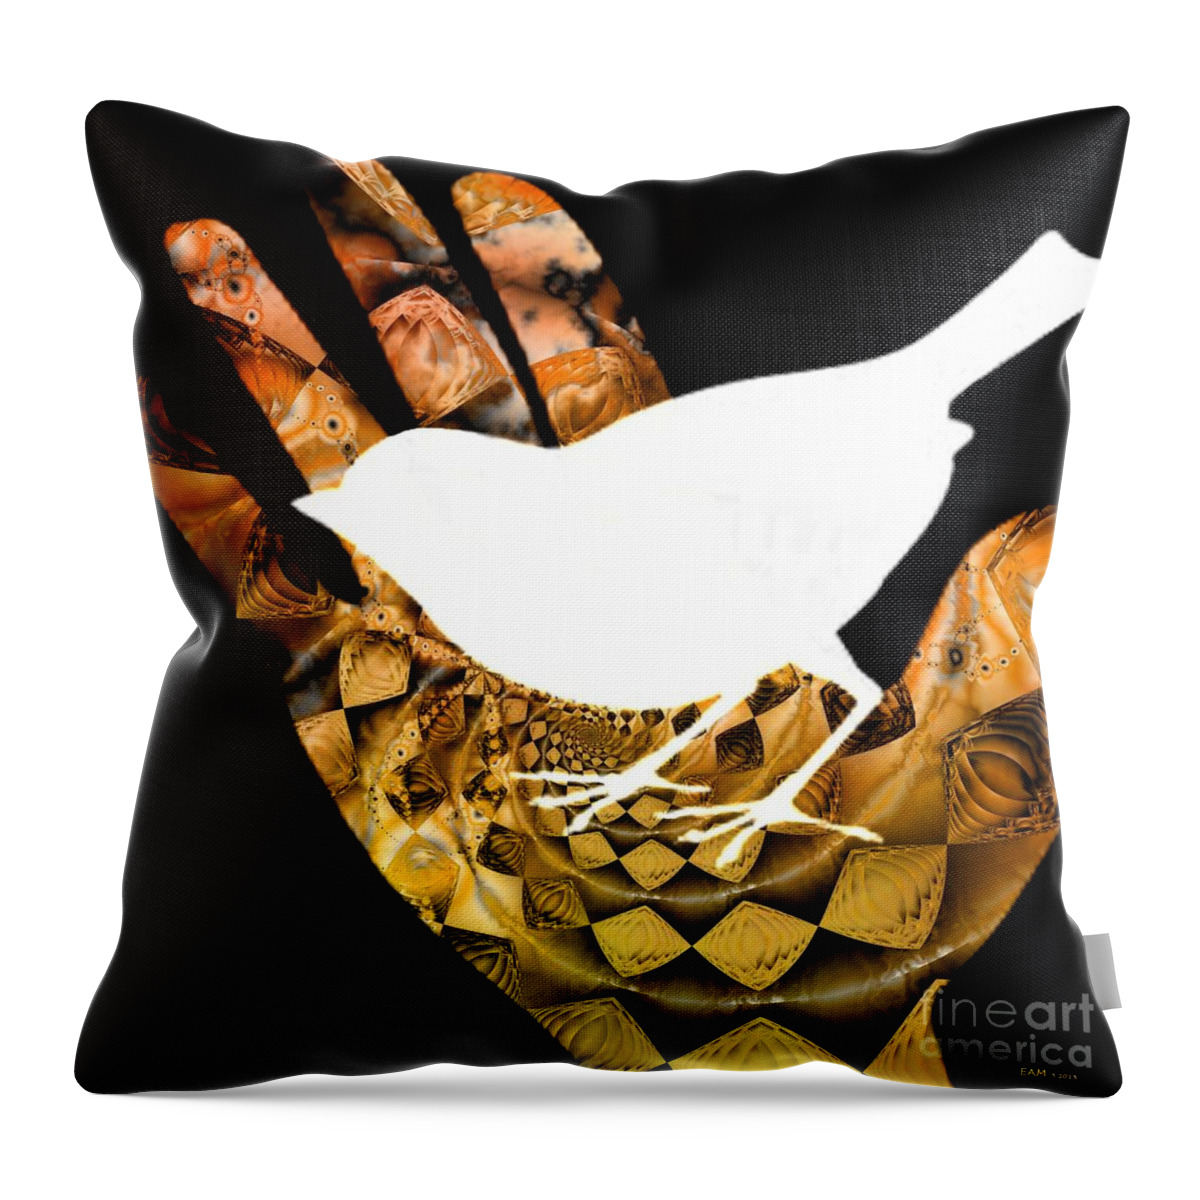 Fractal Art Throw Pillow featuring the digital art A Bird In The Hand Is Worth Two In The Bush by Elizabeth McTaggart